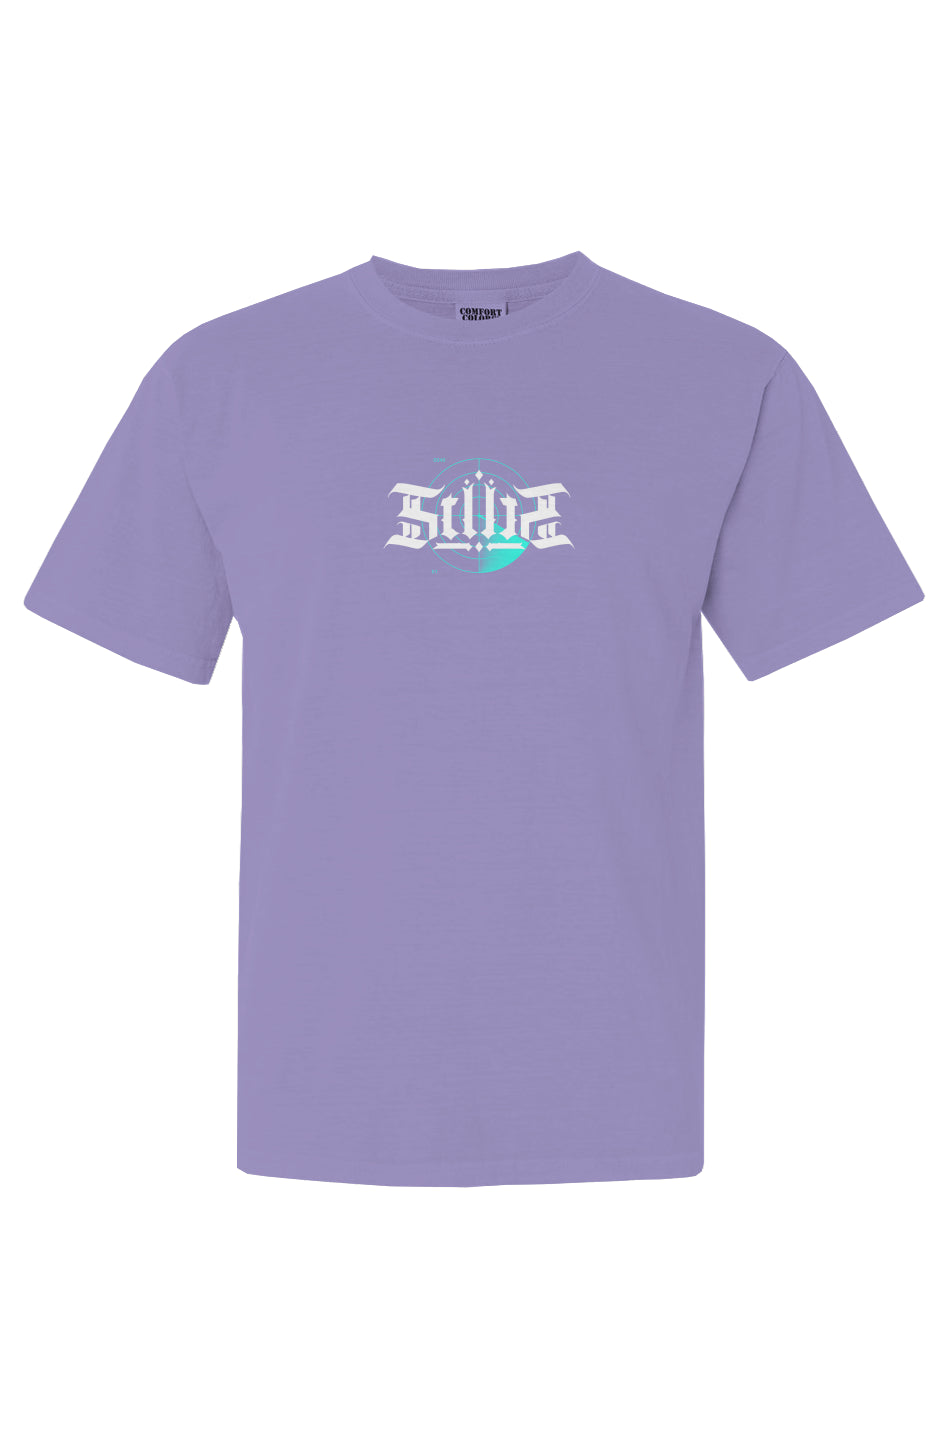 First Signs Tee in Violet